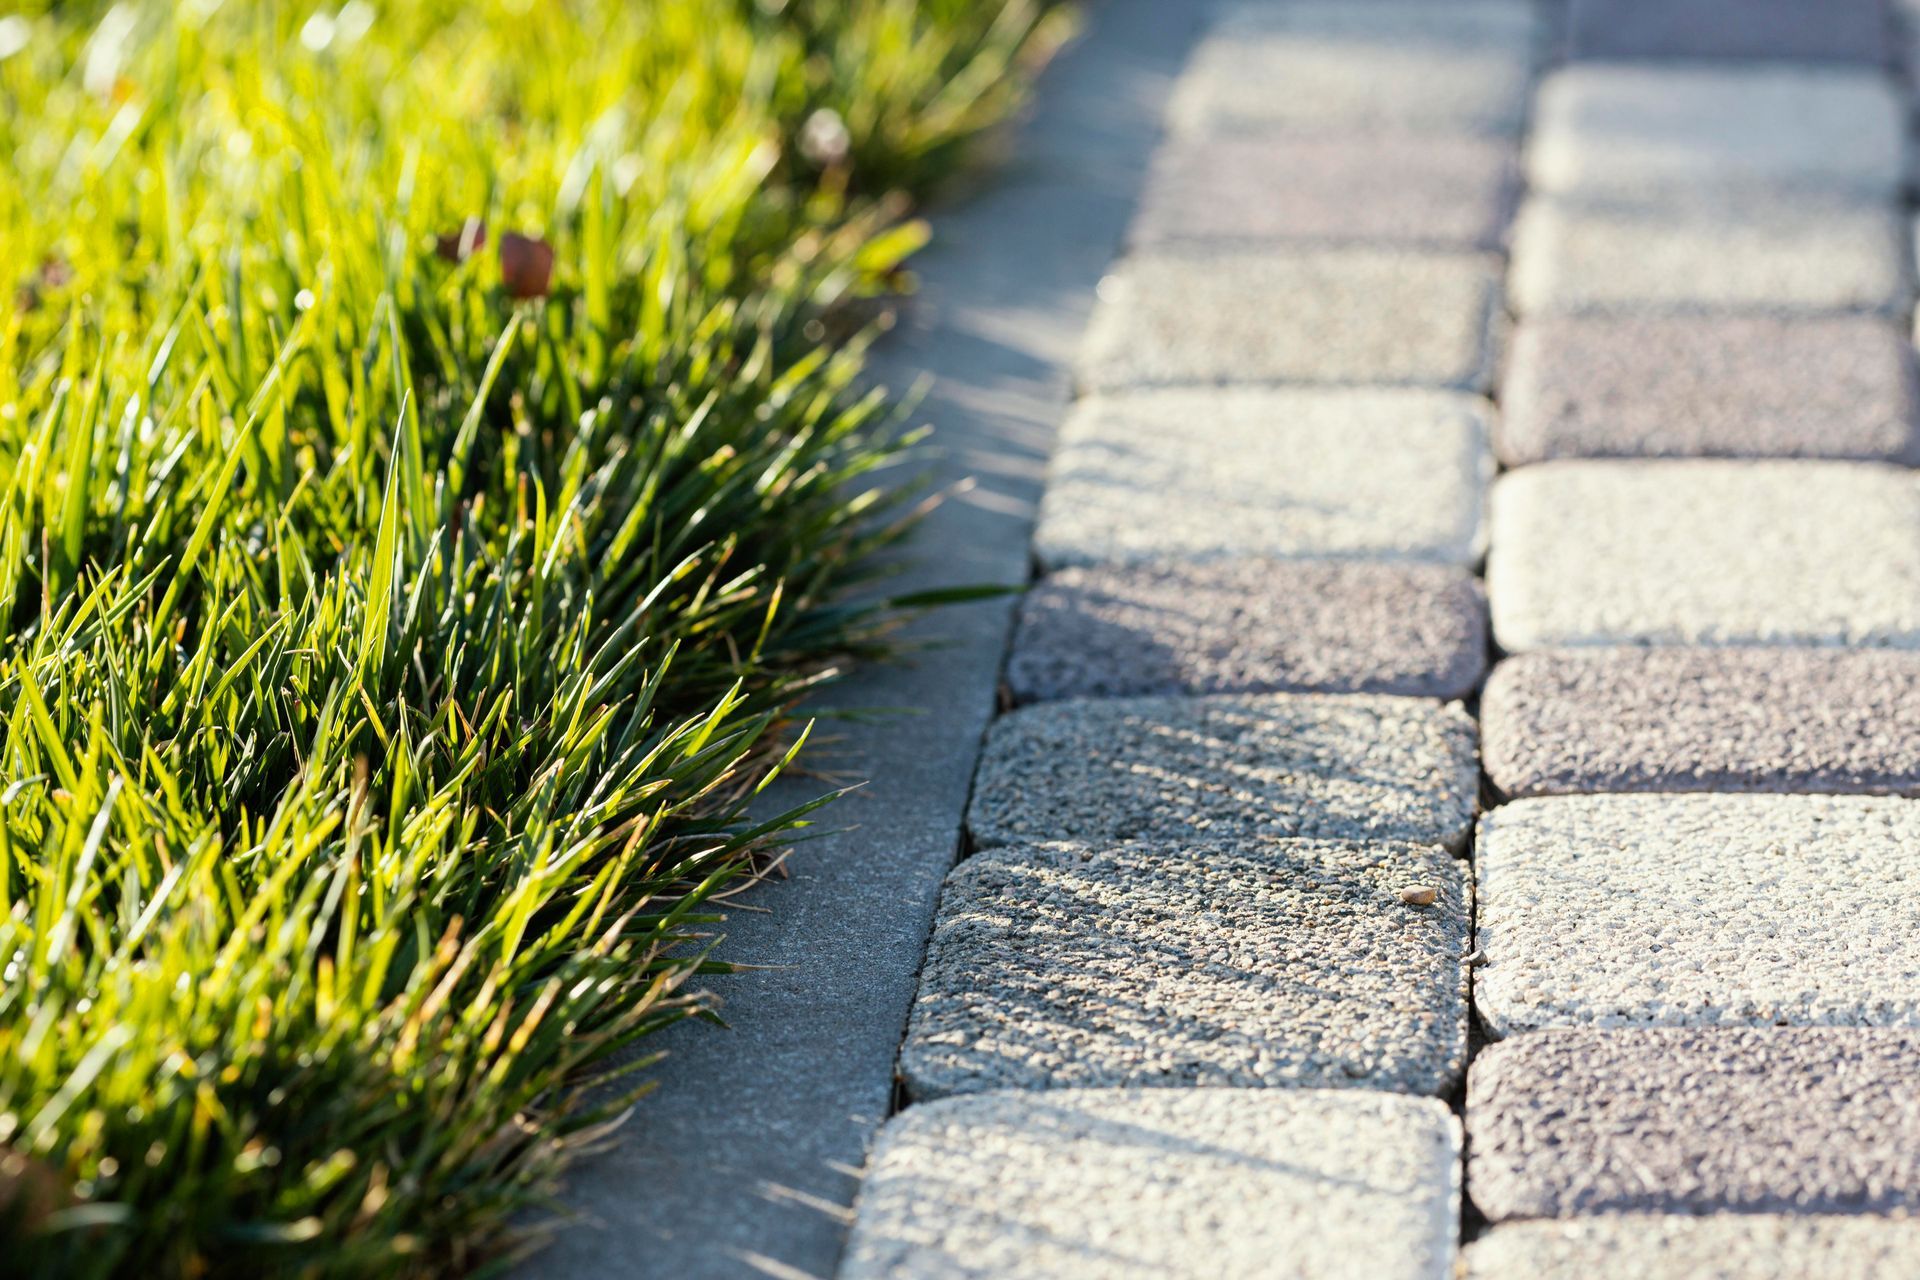 Close-up of driveway paving next to grass